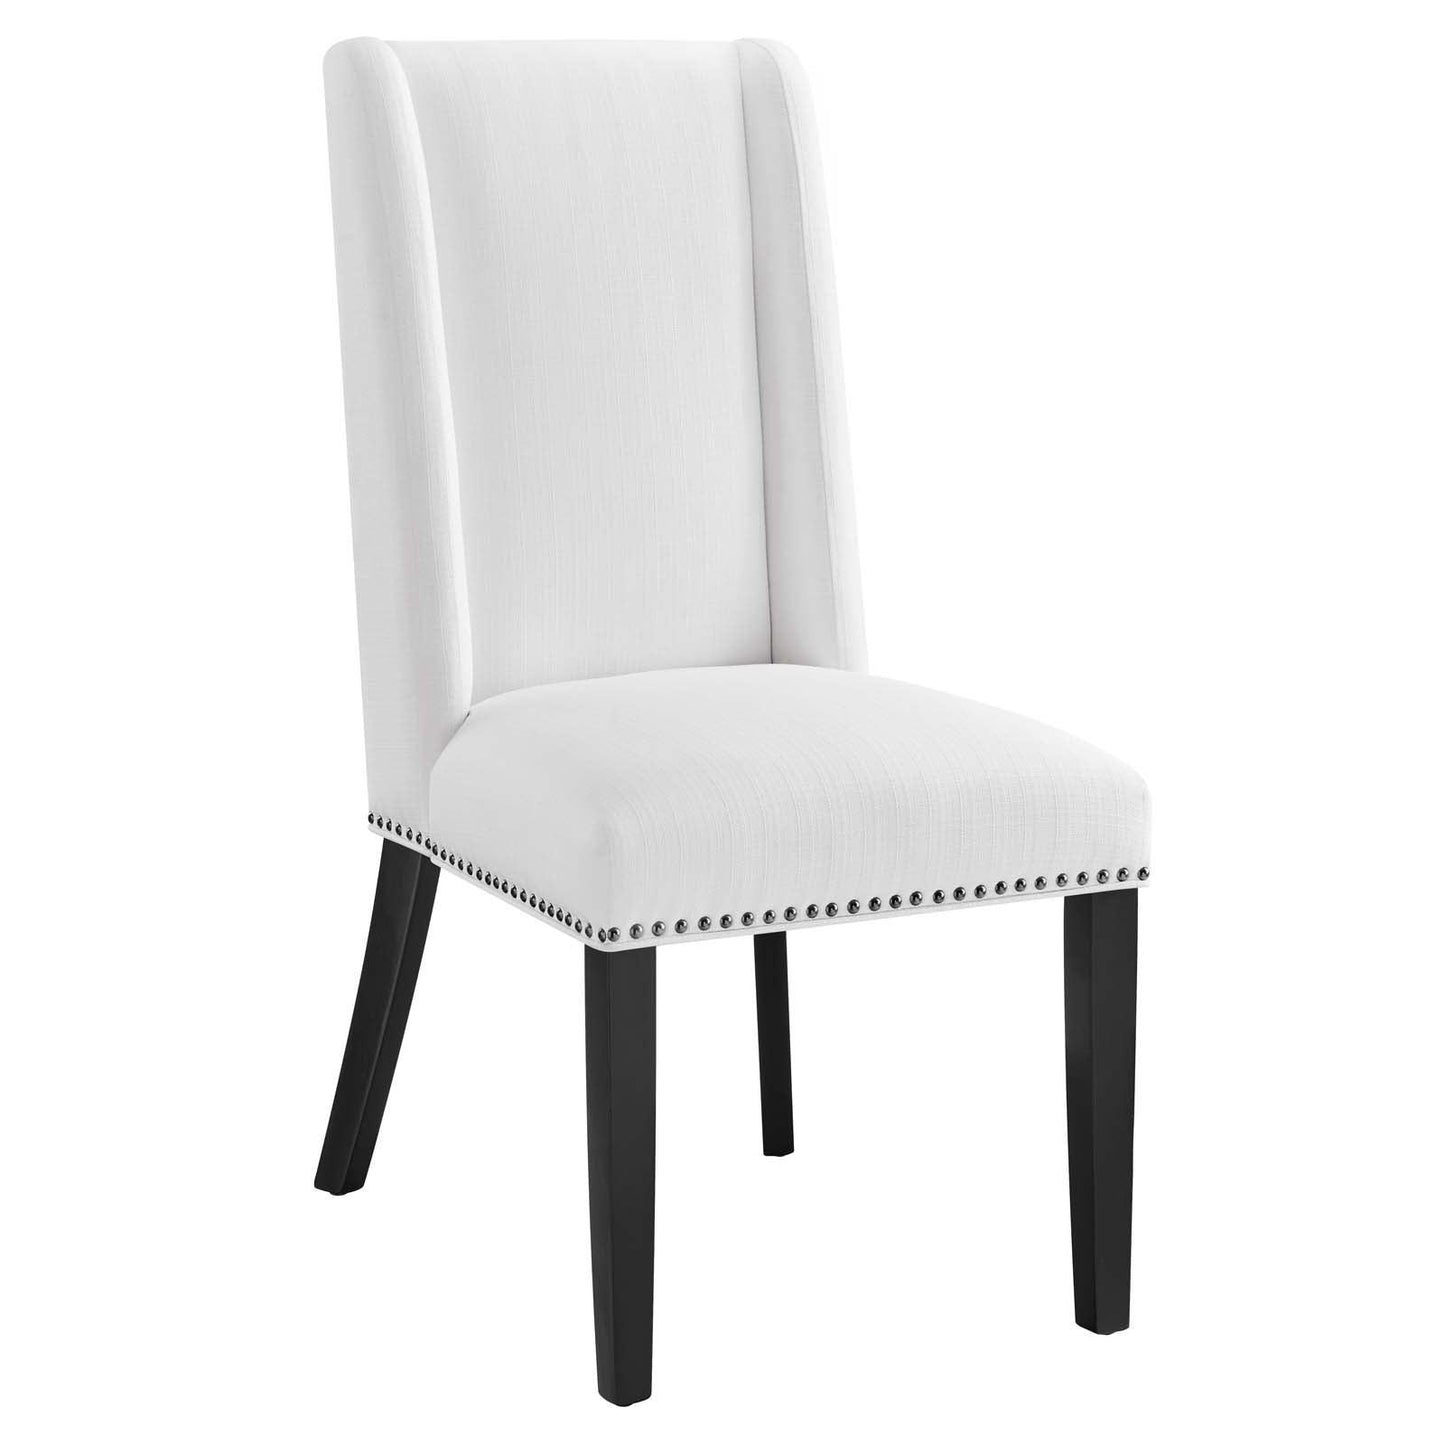 Modway Baron Fabric Dining Chair FredCo